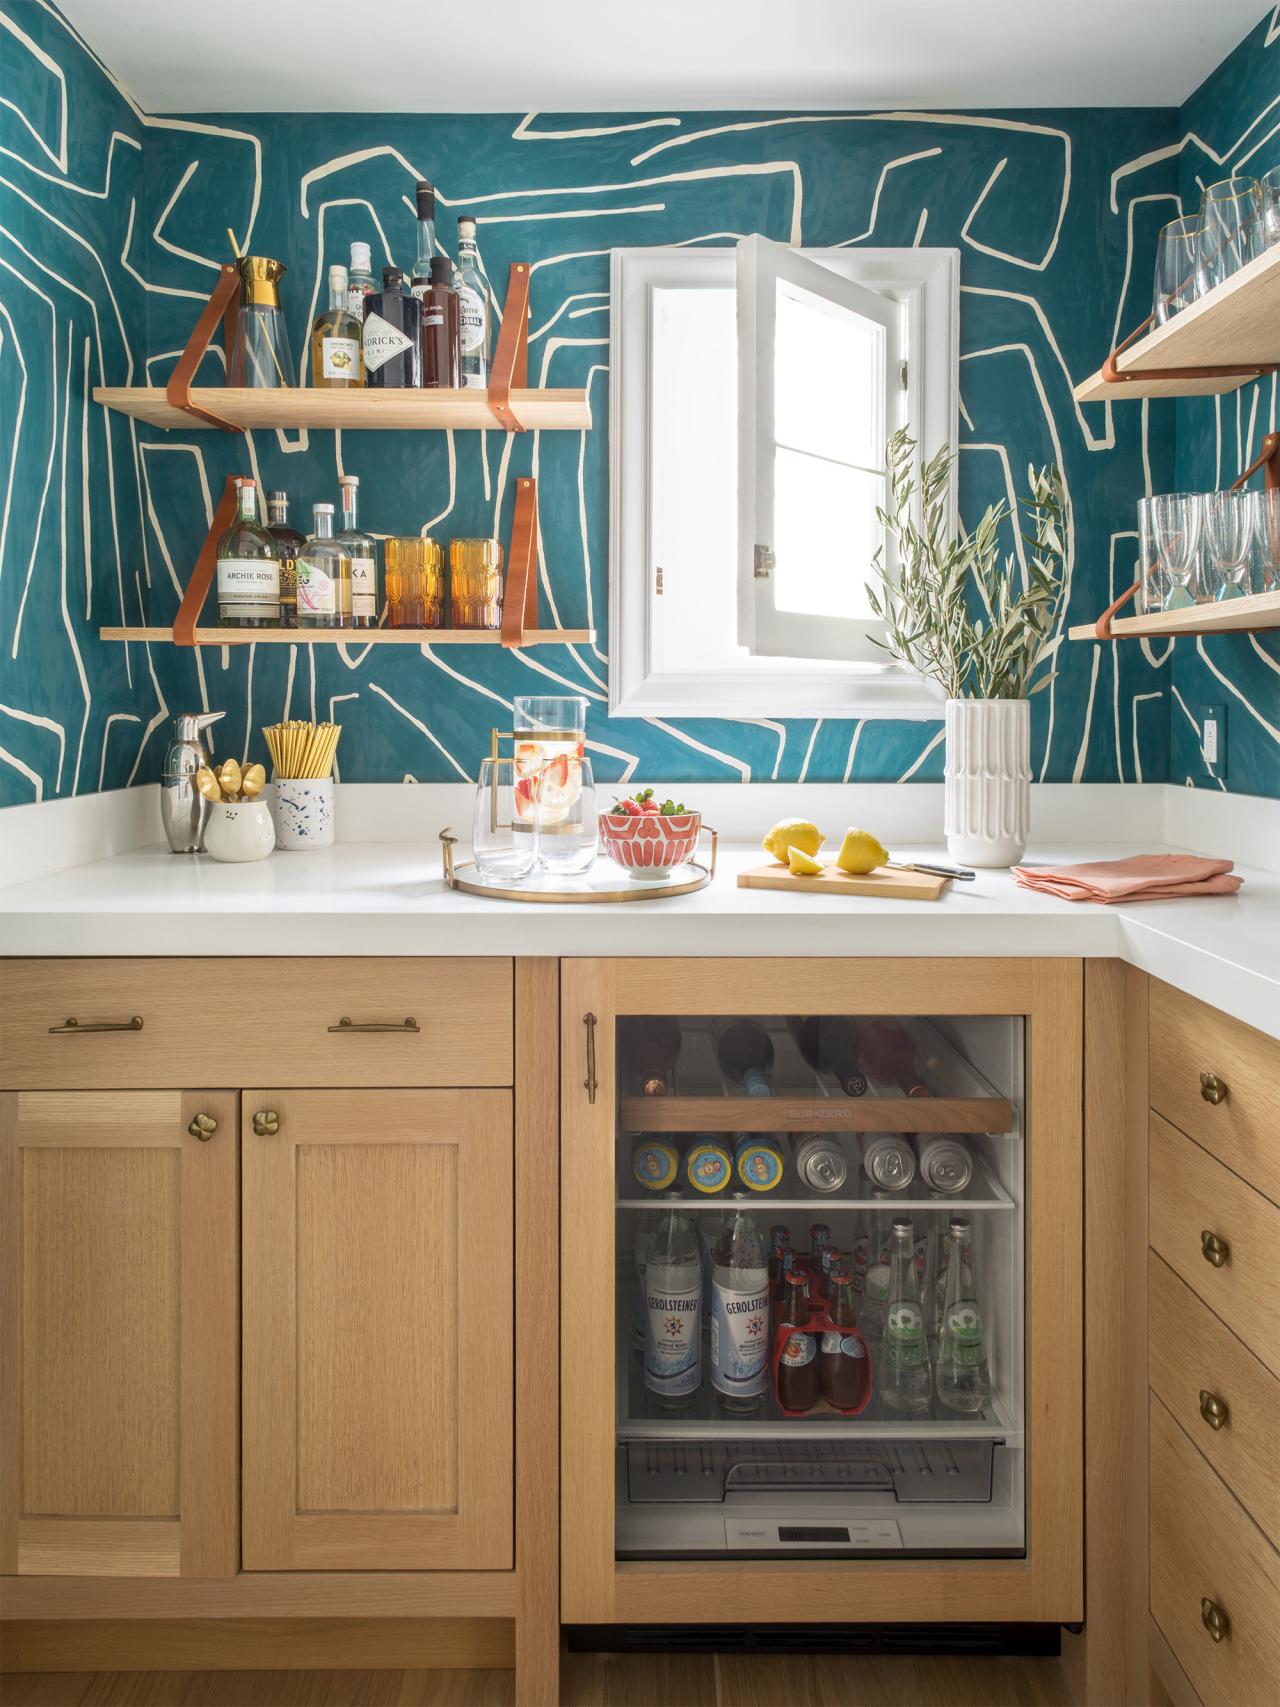 Guest Picks: Whip Up Kitchen Cheer With Aqua and Red